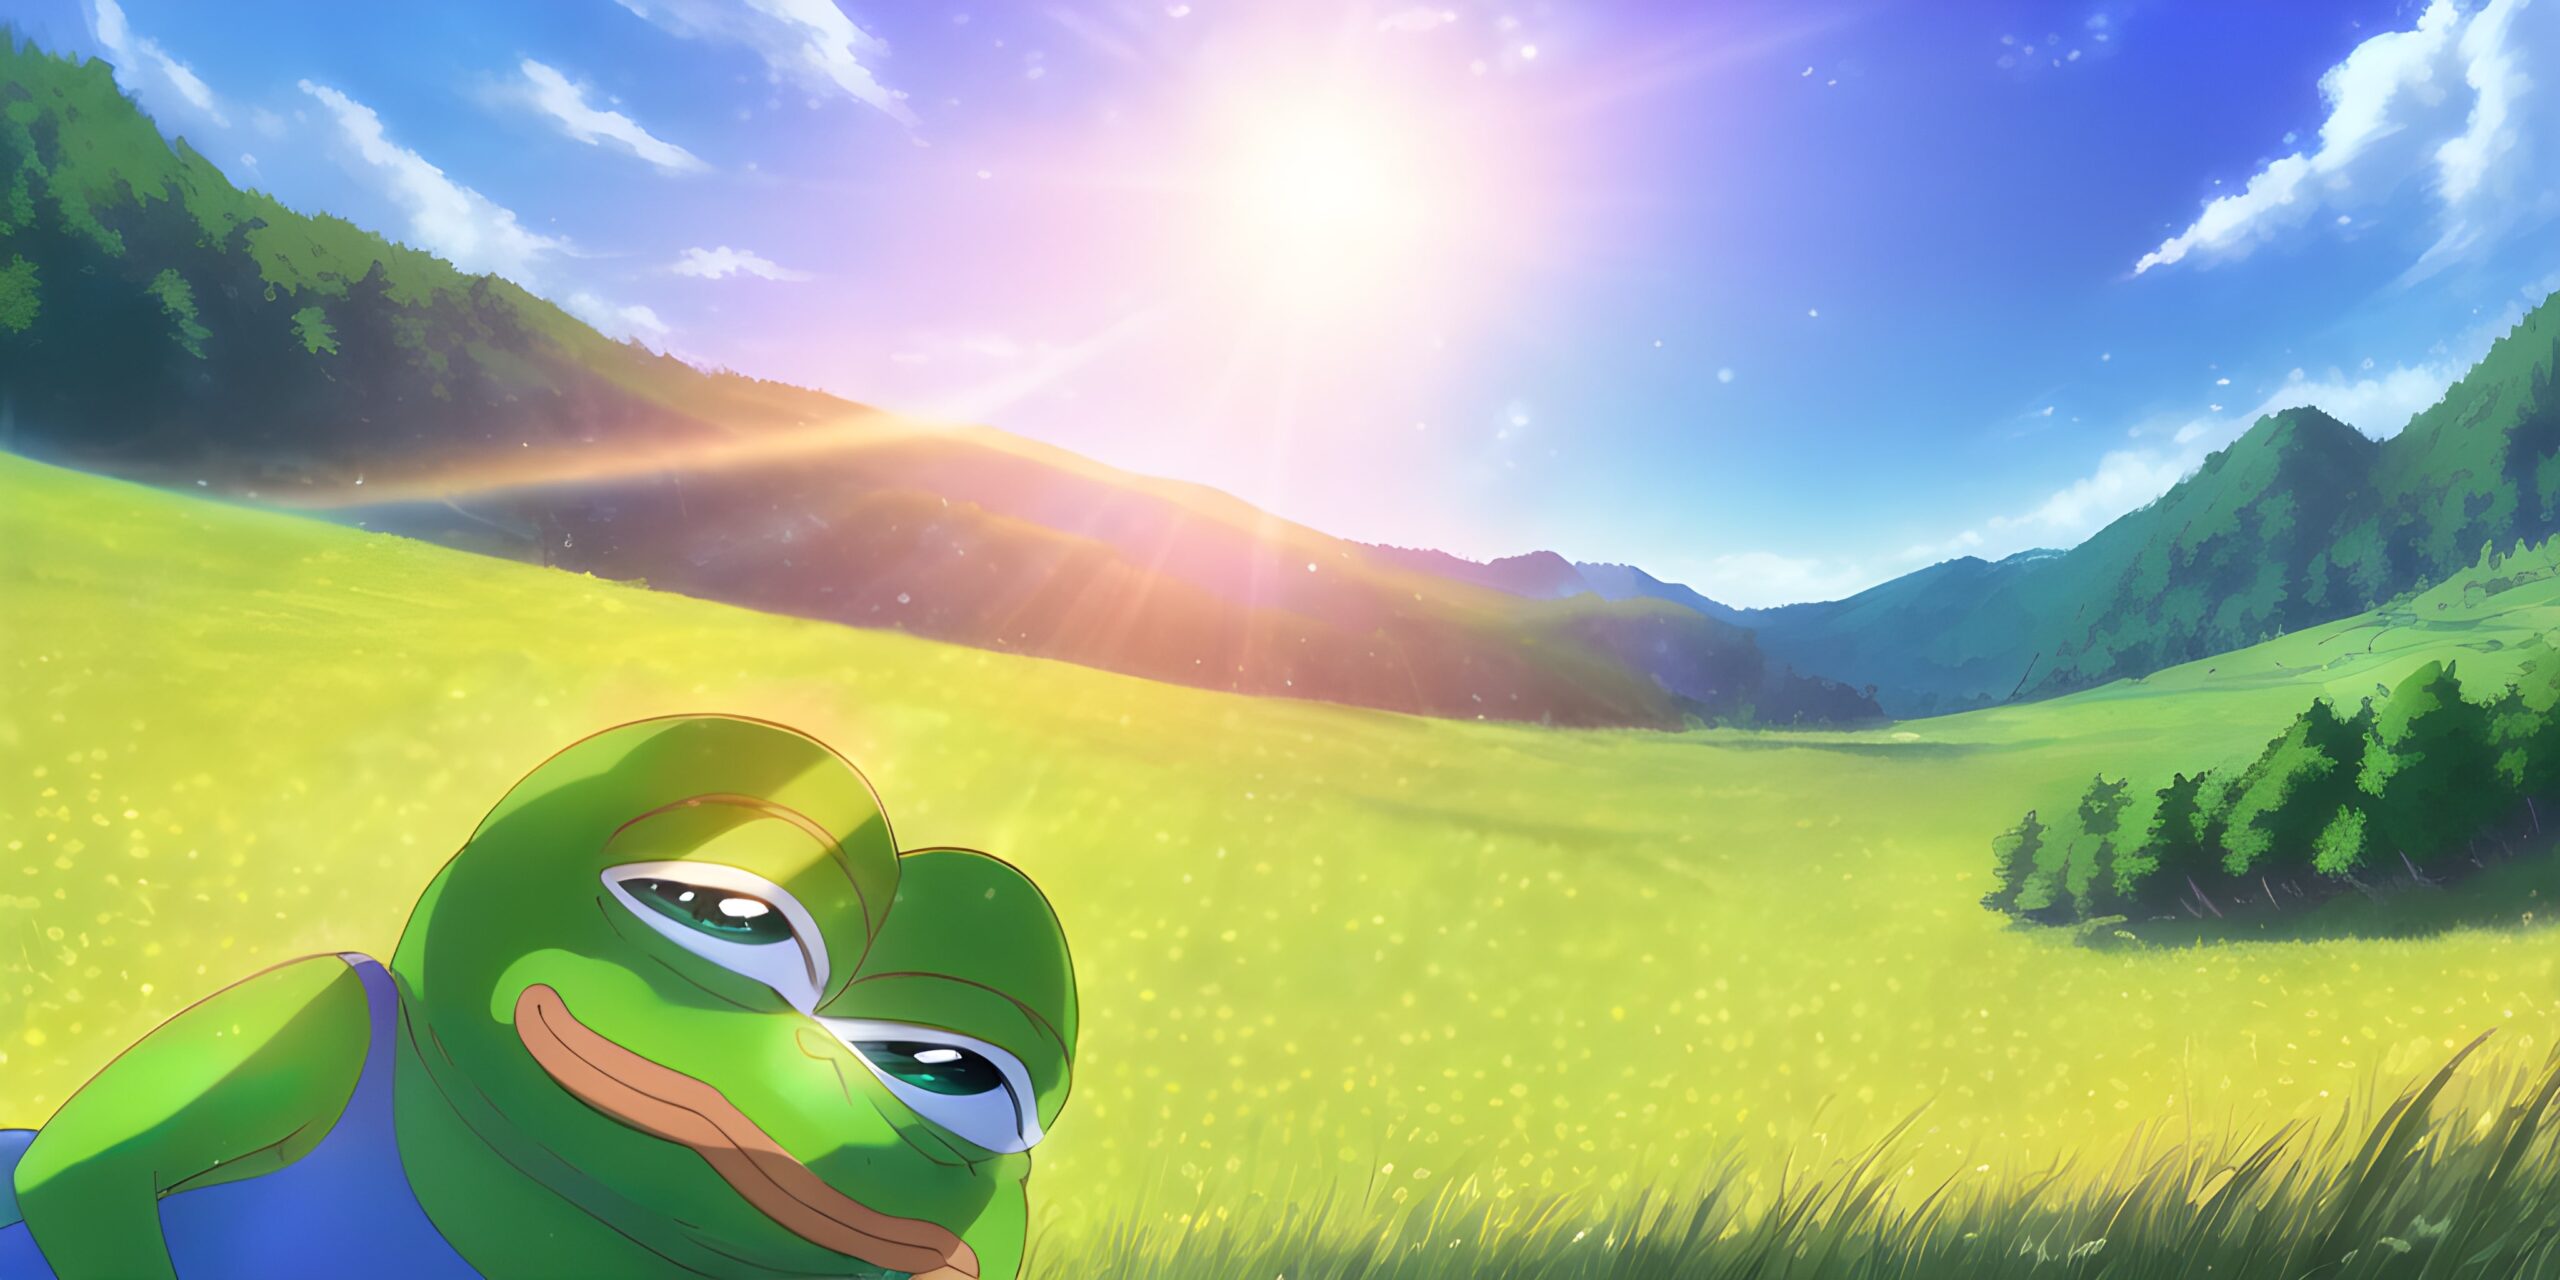 Pepe/Apu the Frog on the Meadow